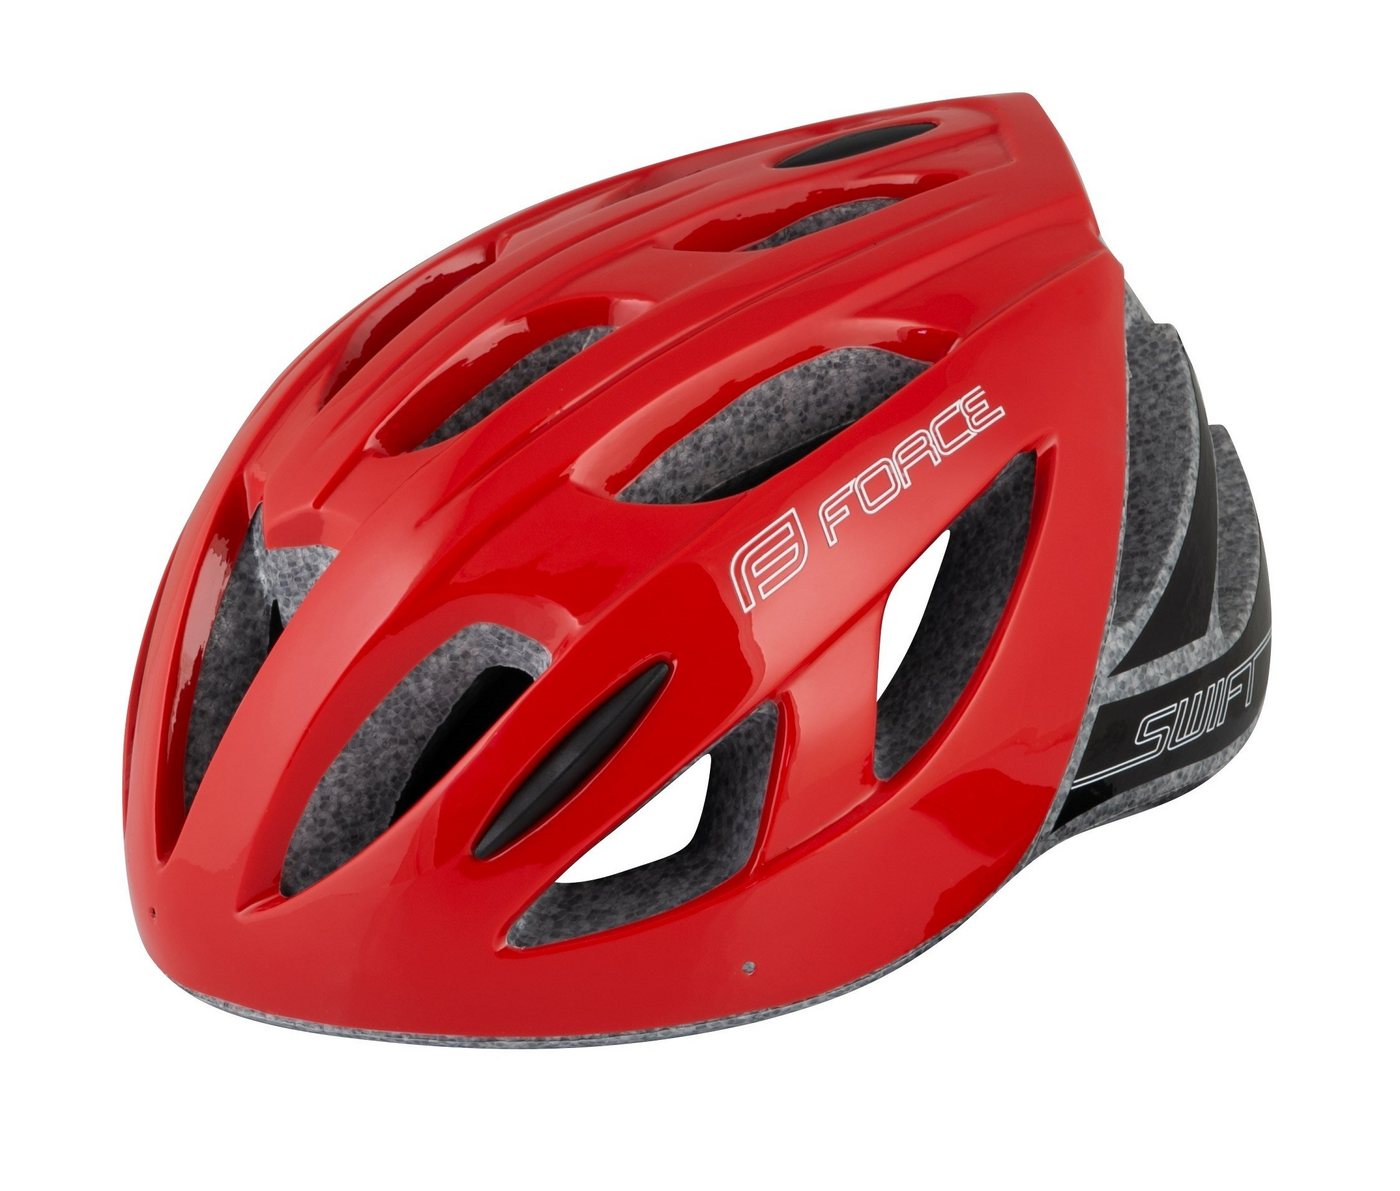 FORCE Fahrradhelm Helm rot FORCE SWIFT Gr. XS-S von FORCE